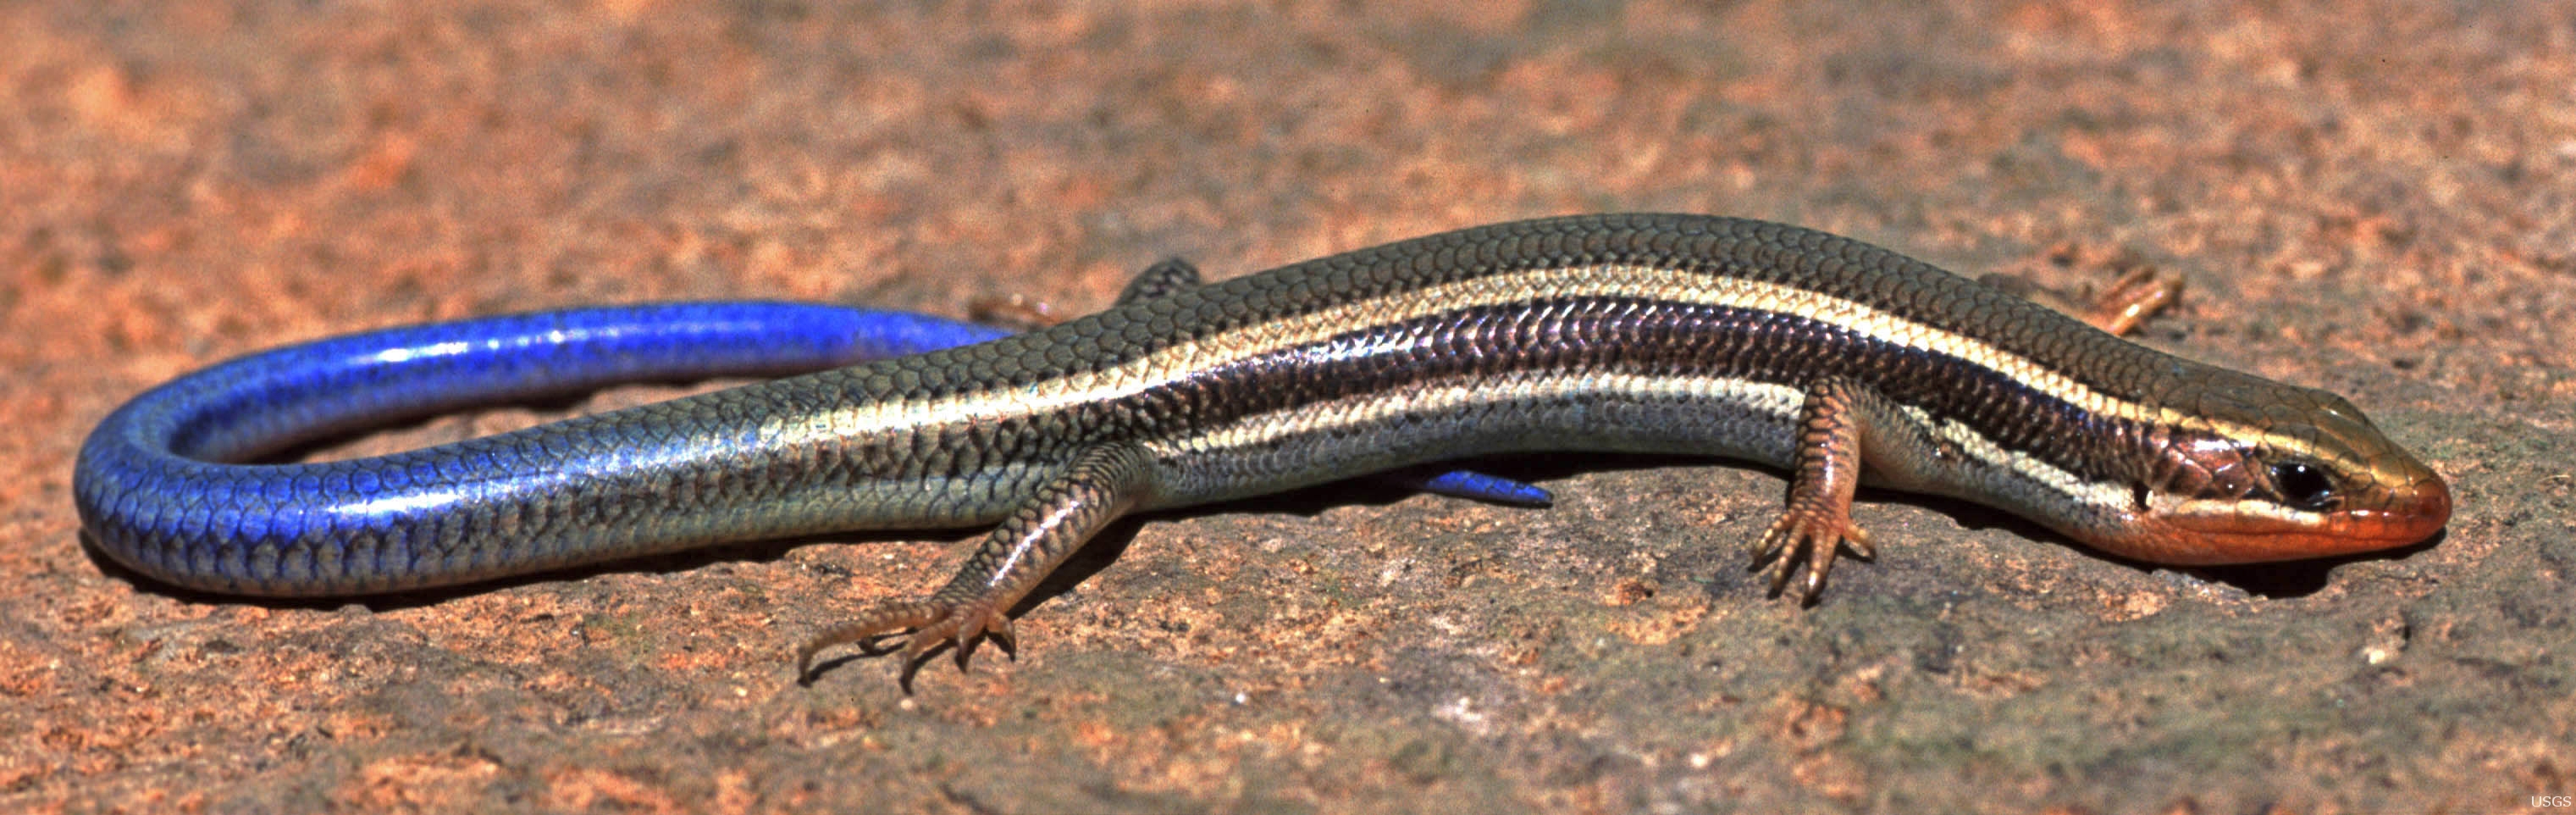 Images of Skink | 3042x962